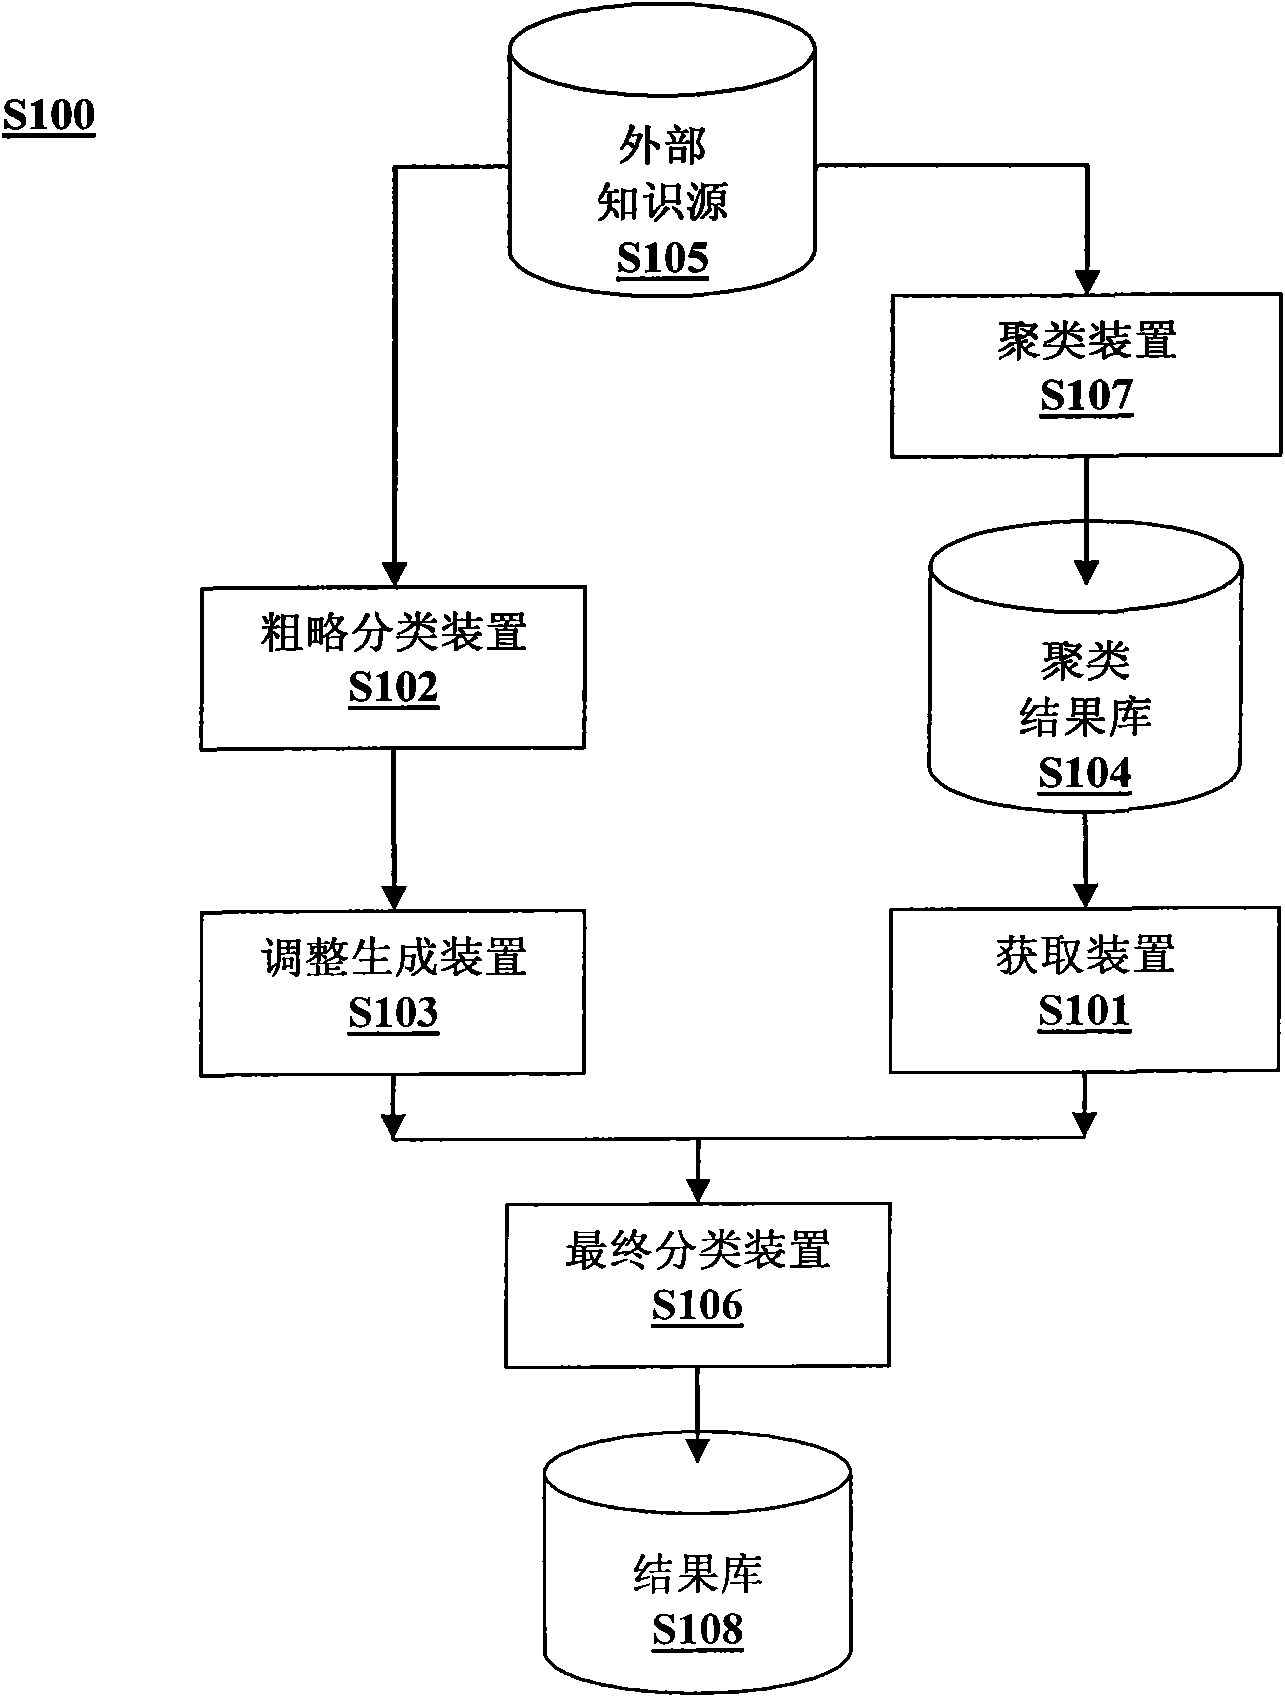 Method and system for digital object classification